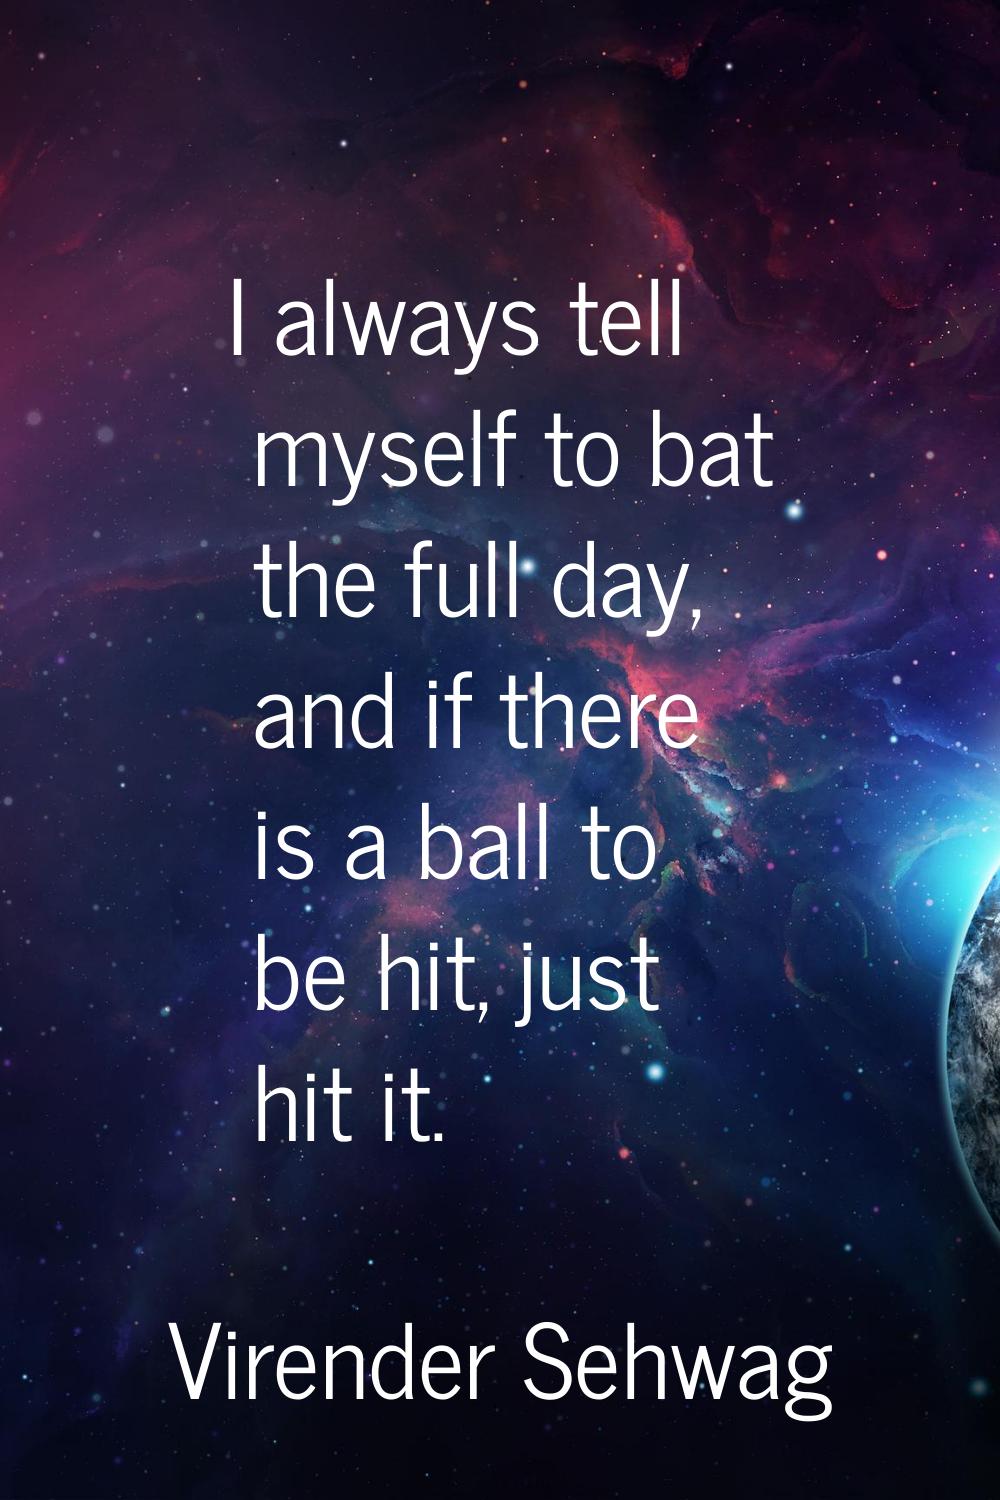 I always tell myself to bat the full day, and if there is a ball to be hit, just hit it.